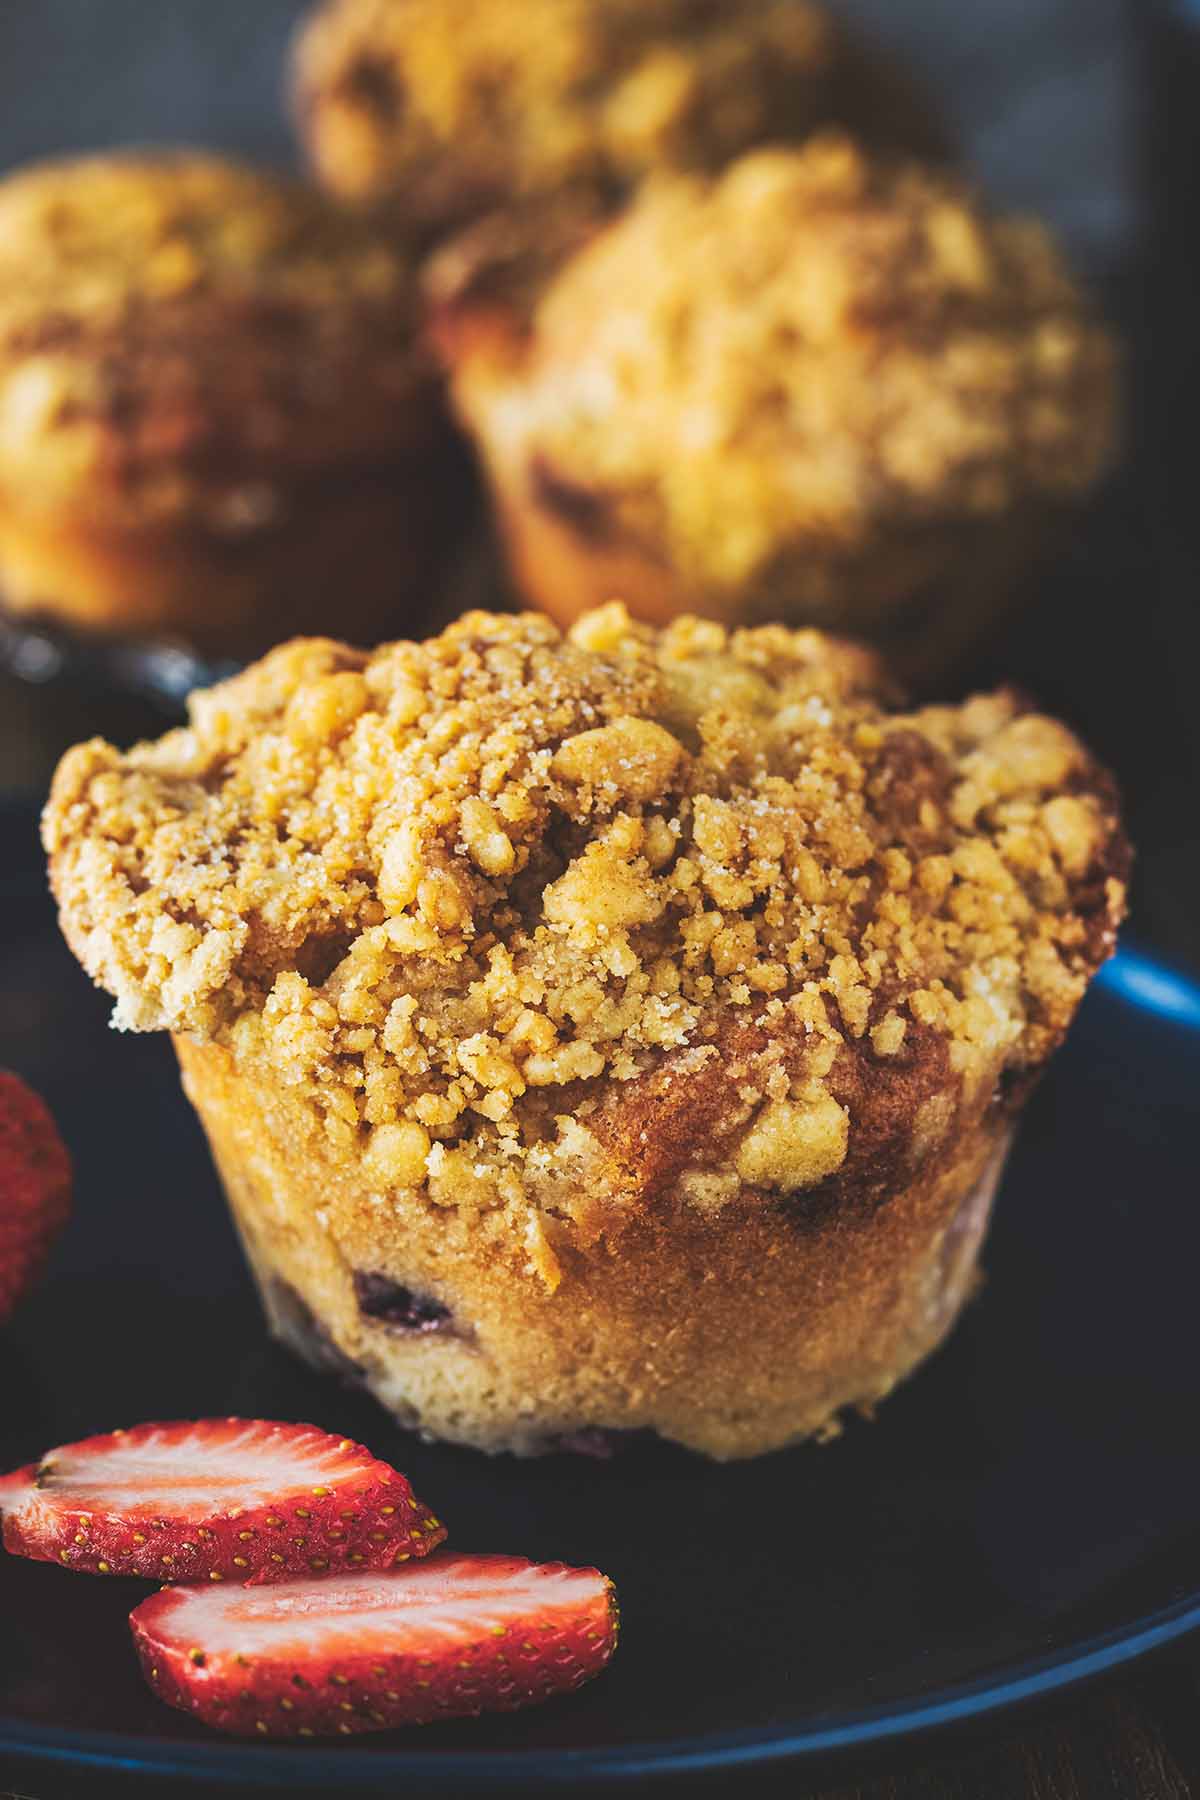 Strawberry muffins with ginger crumb topping on a blue plate with sliced strawberries